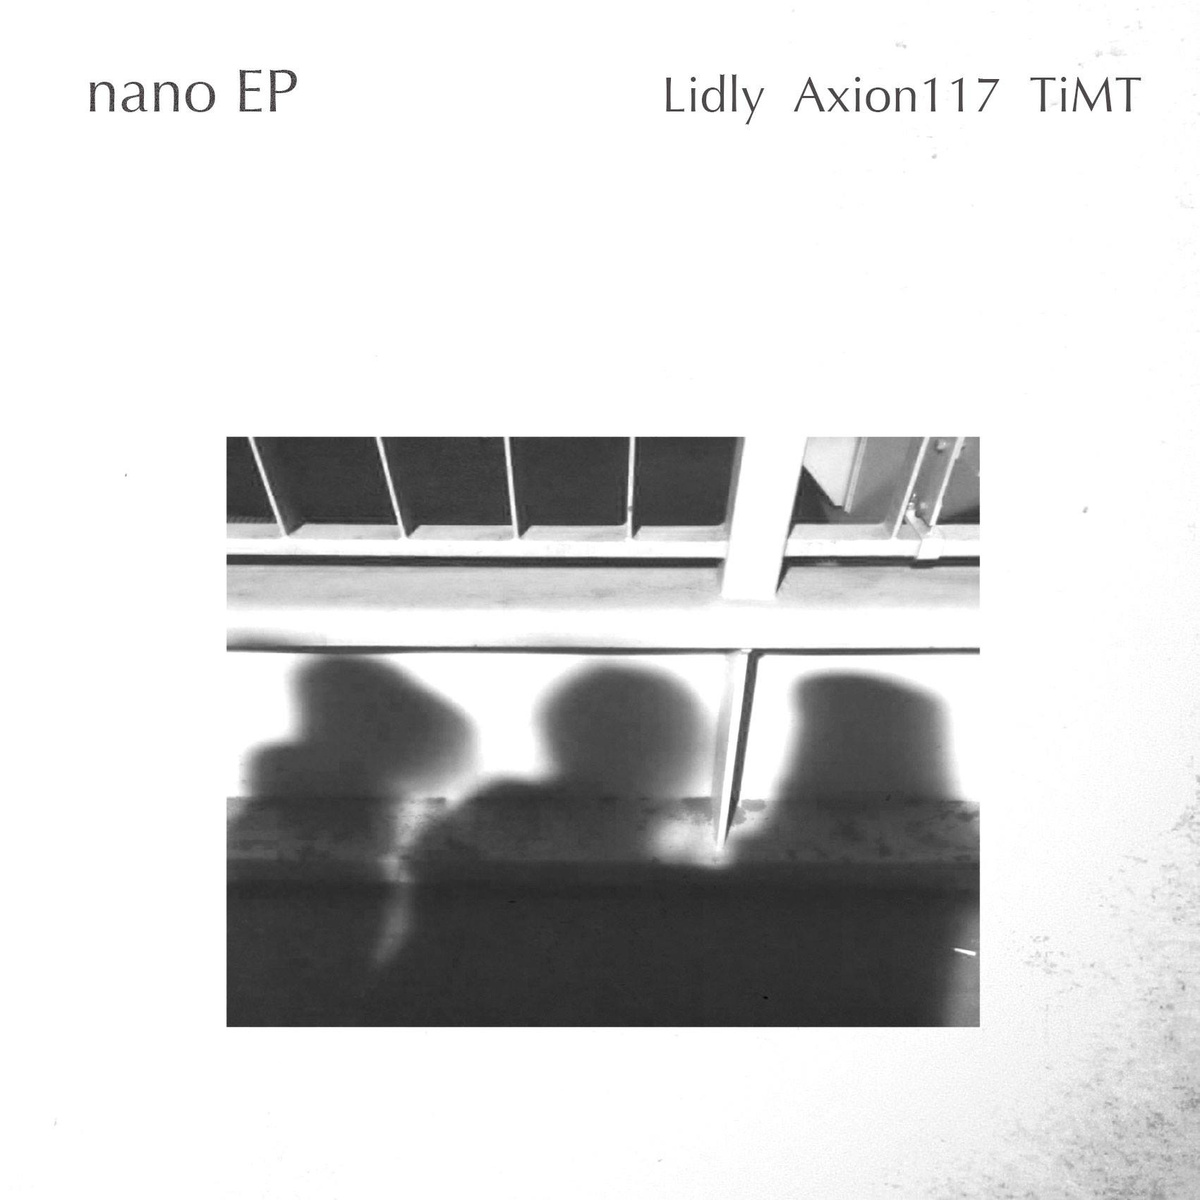 Lidley, Axion117 & TiMT - "Nano" (Release) | @Lidly7 @axion117